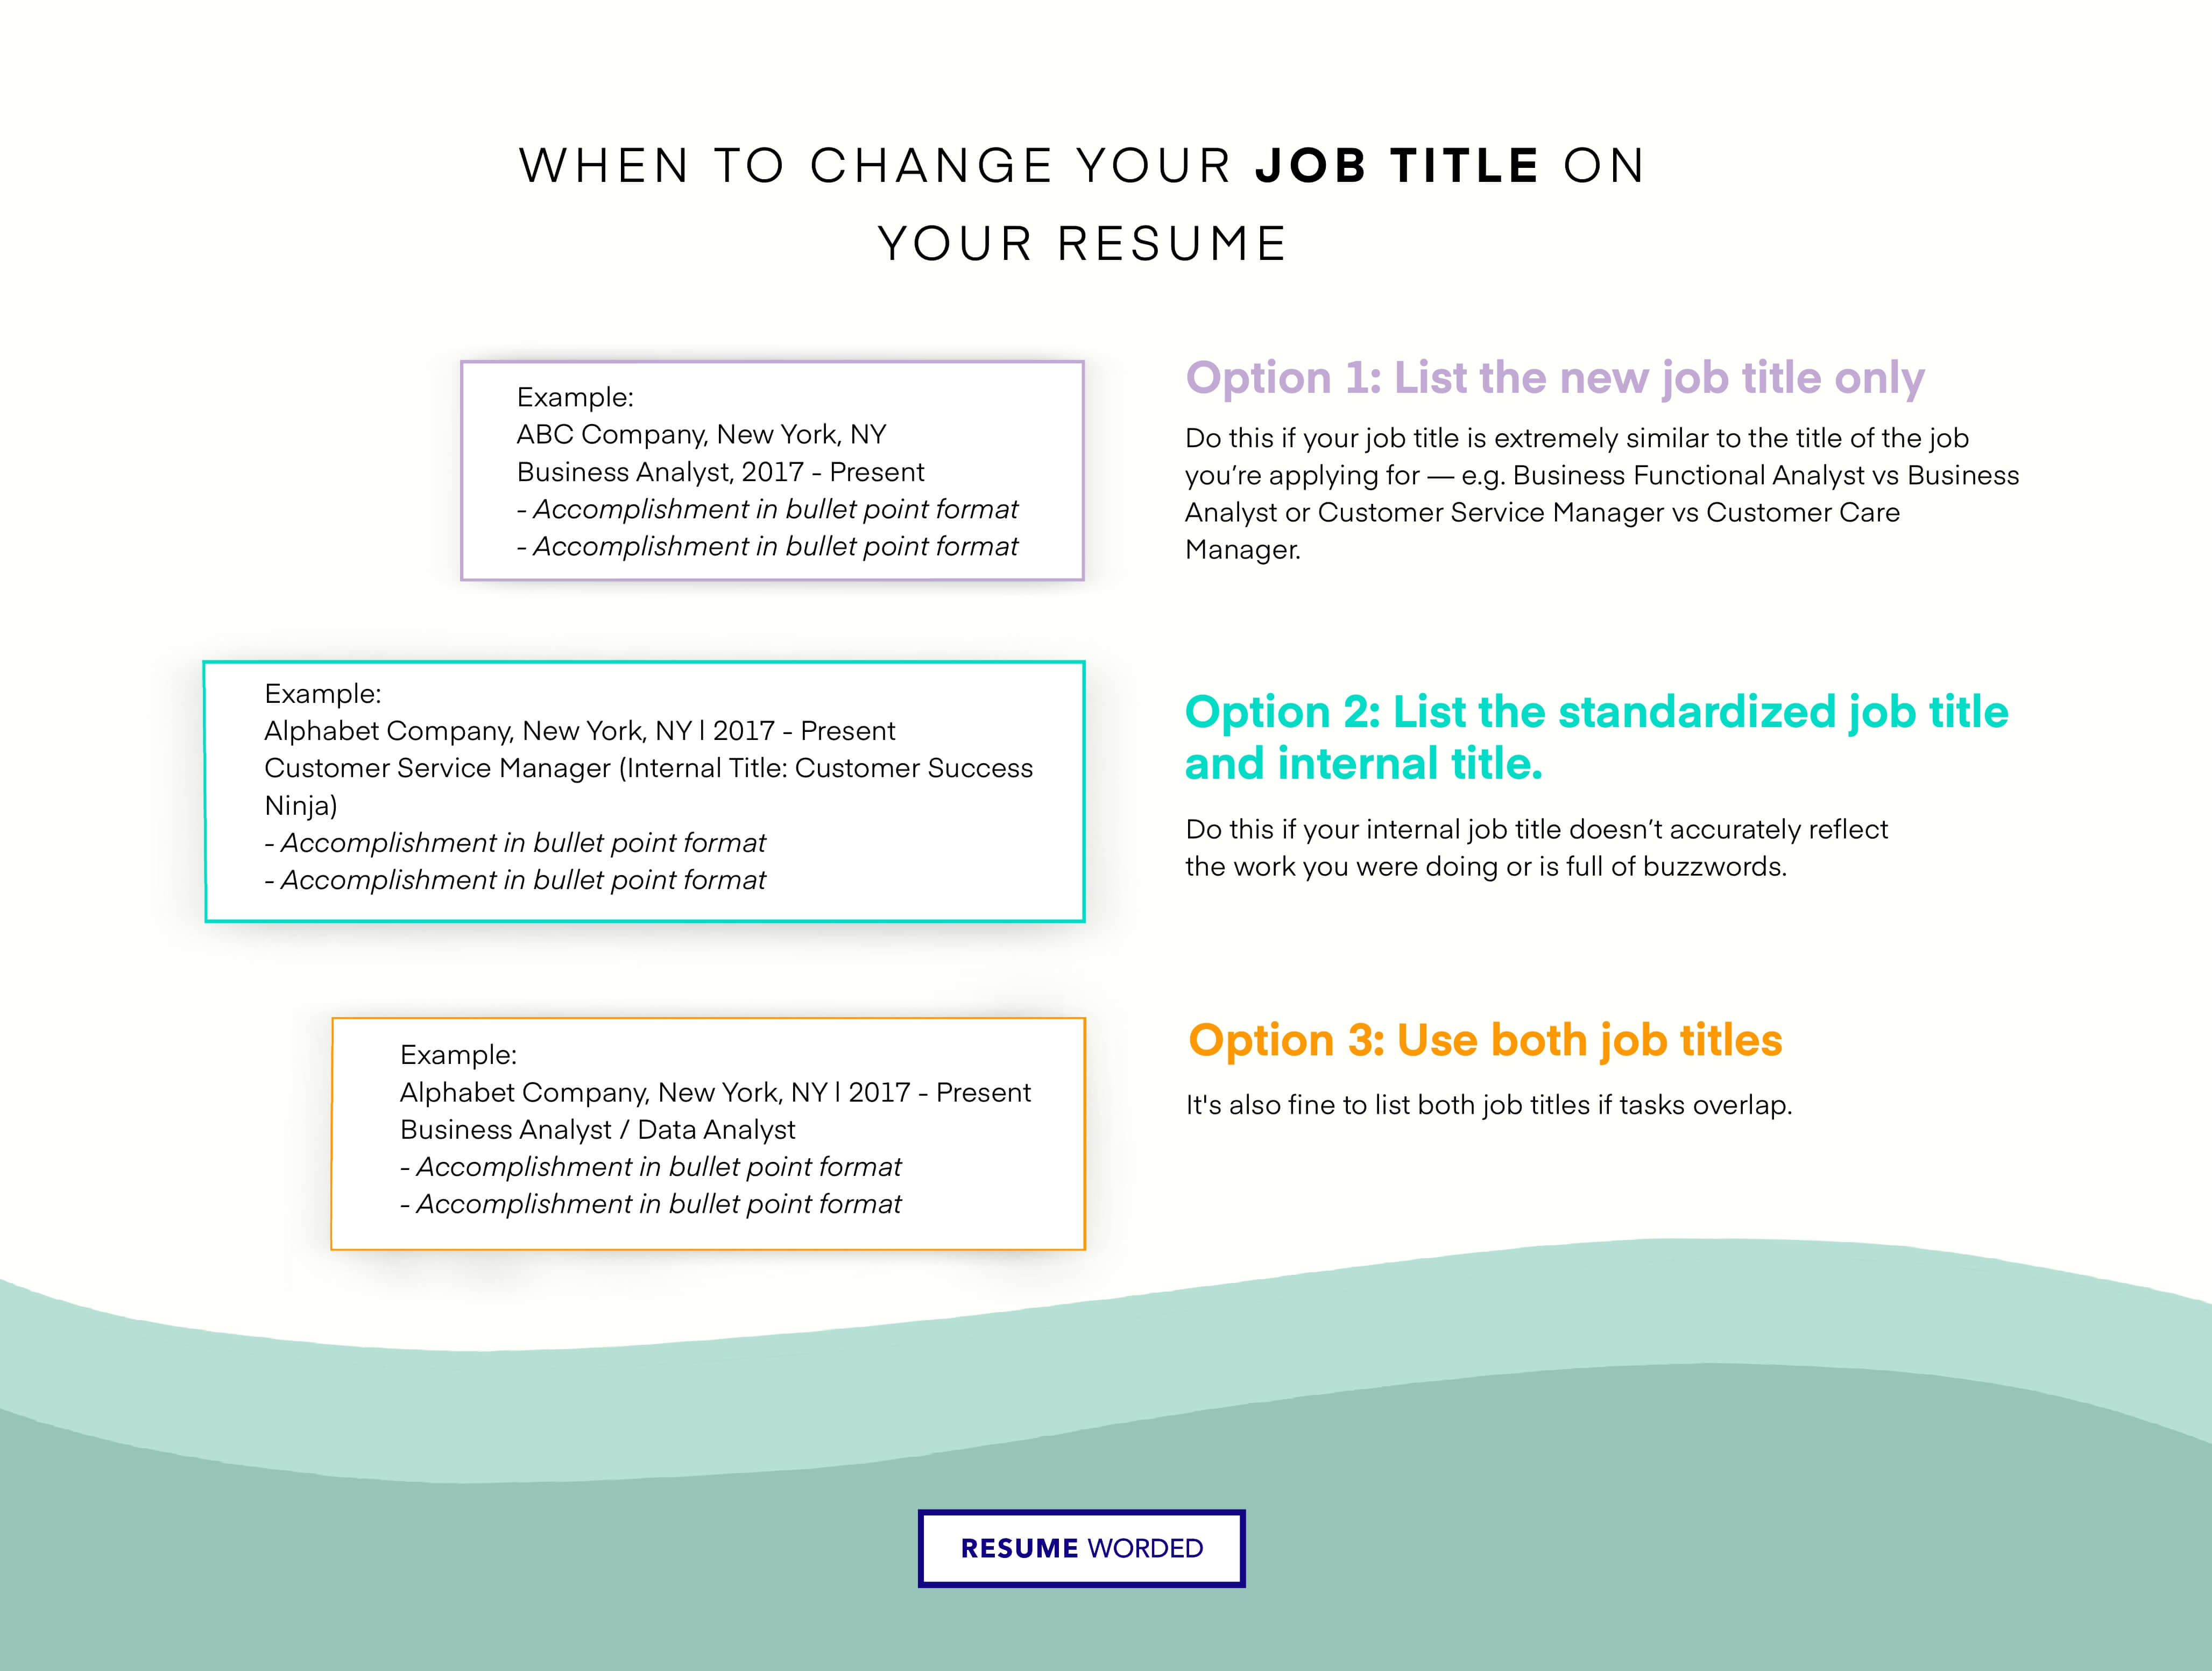 Changing Job Titles on Your Resume Do’s and Don’ts